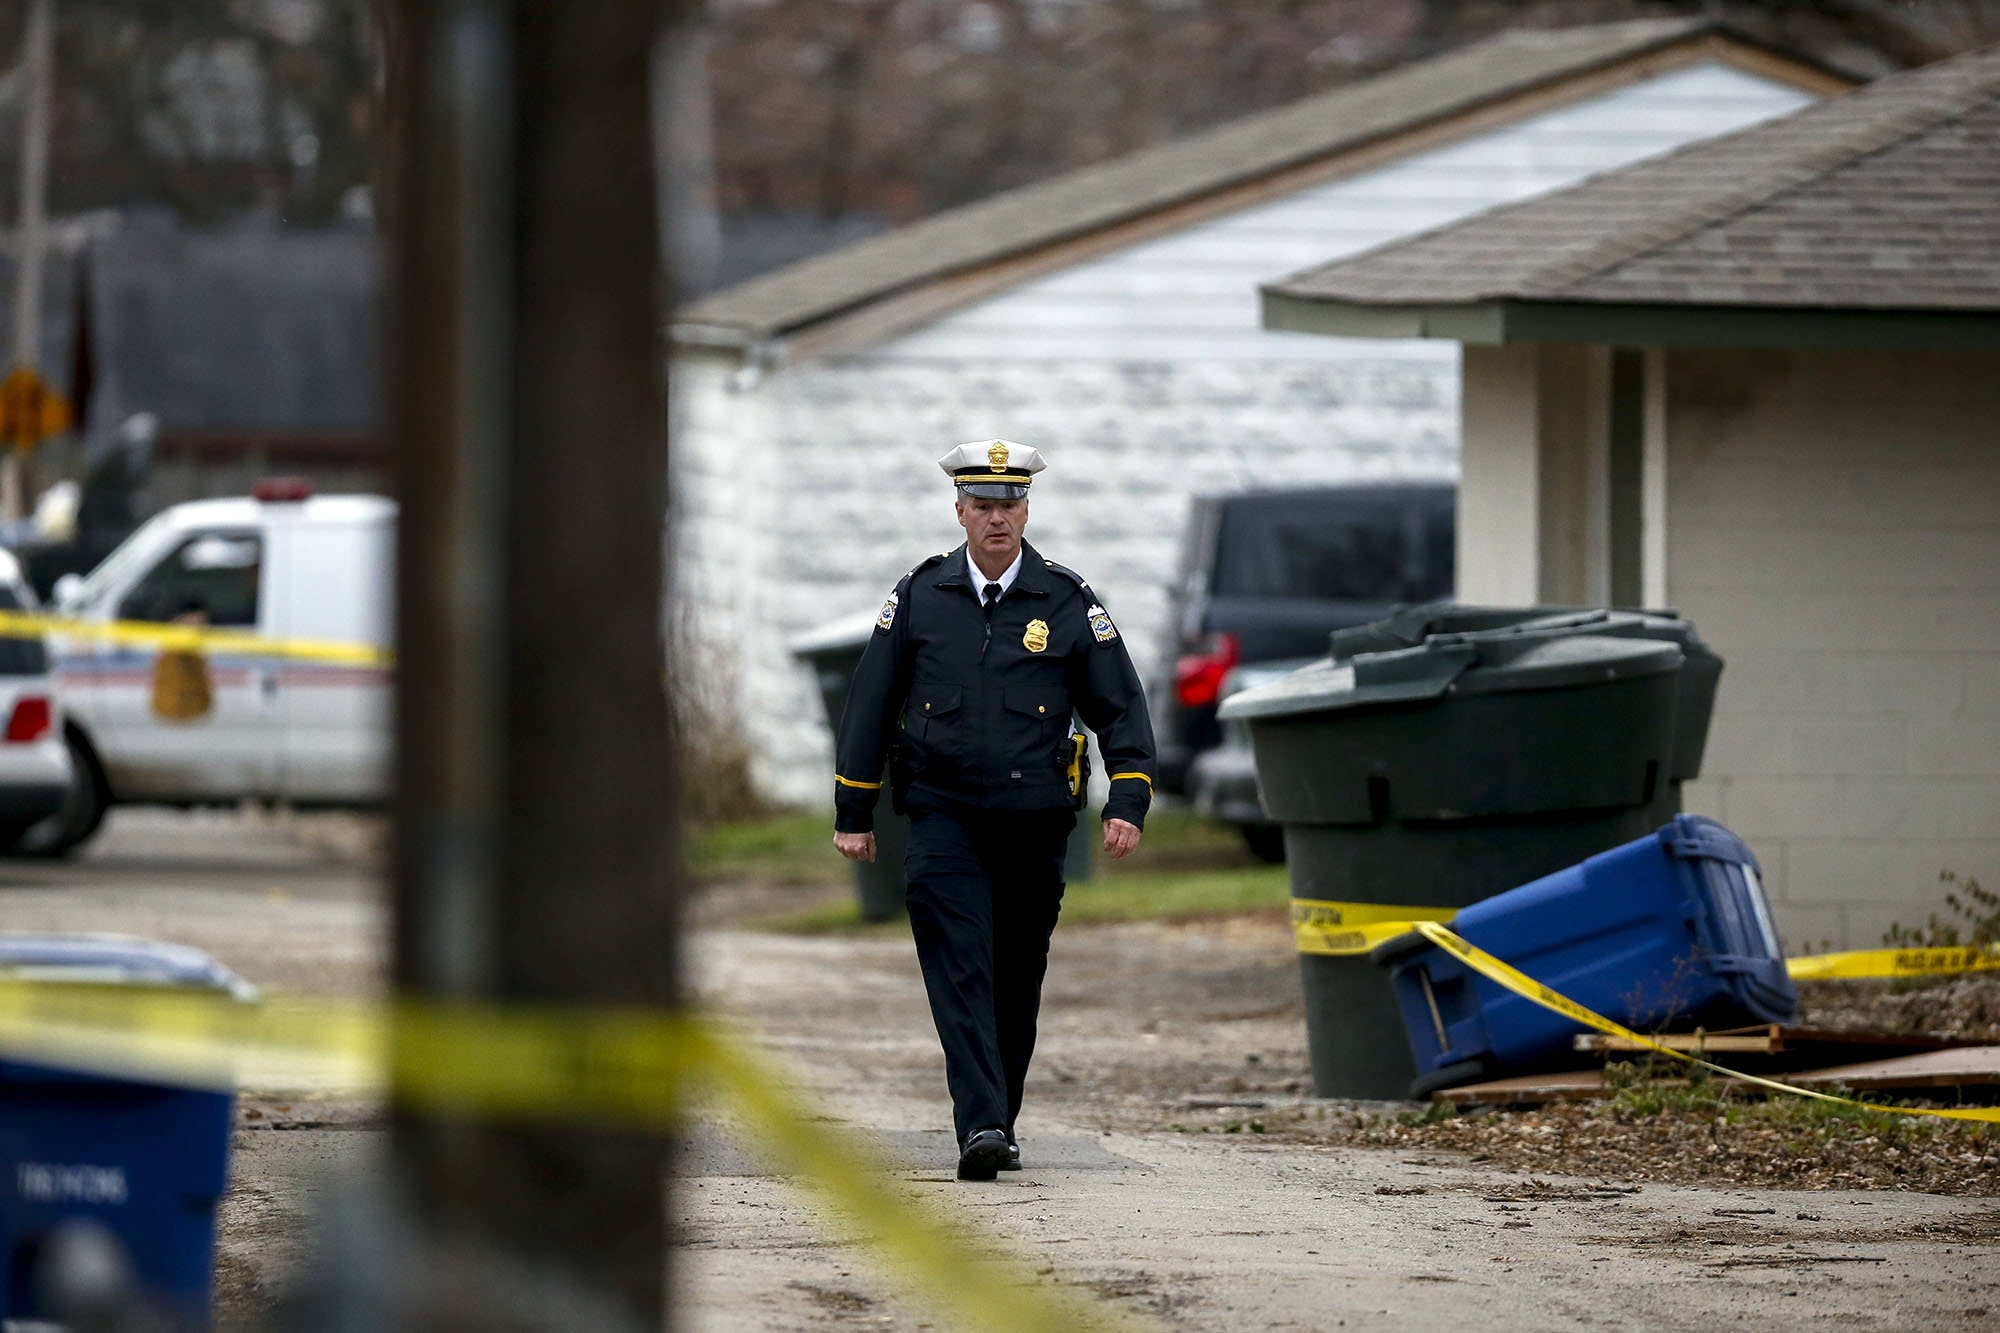 PHOTO: A police officer walks through the alley near 6th Avenue and Cortland Avenue in Columbus, Ohio where the body of missing Ohio State football player, Kosta Karageorge was discovered in a dumpster on Nov. 30, 2014. 